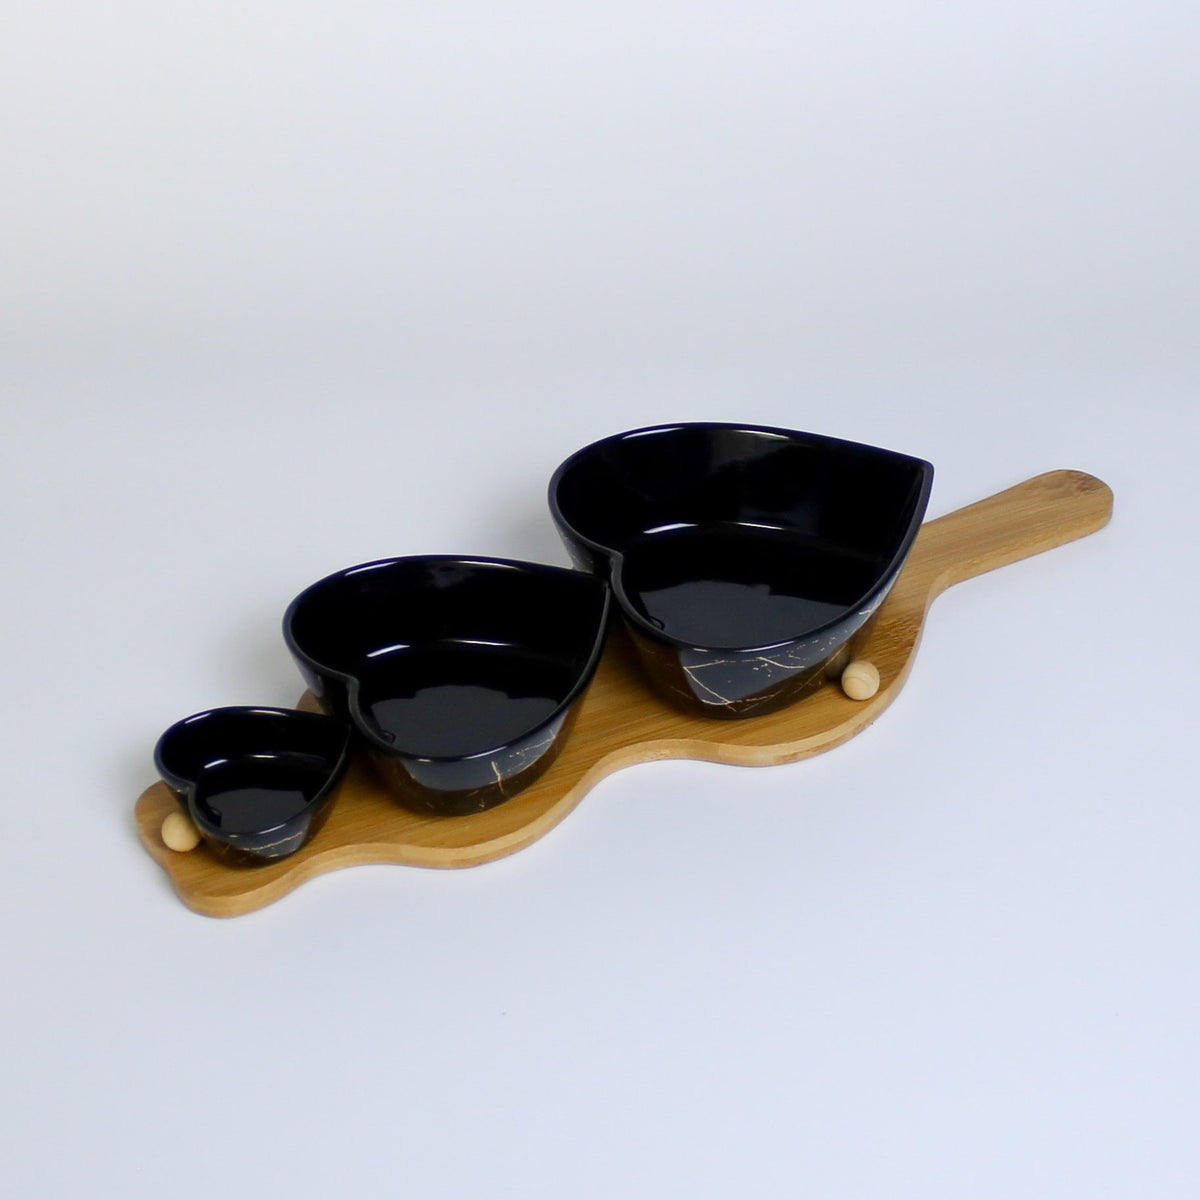 Modern design serving tray heart shaped bowls dish nuts dried fruit divider ceramic snack fruit tray set